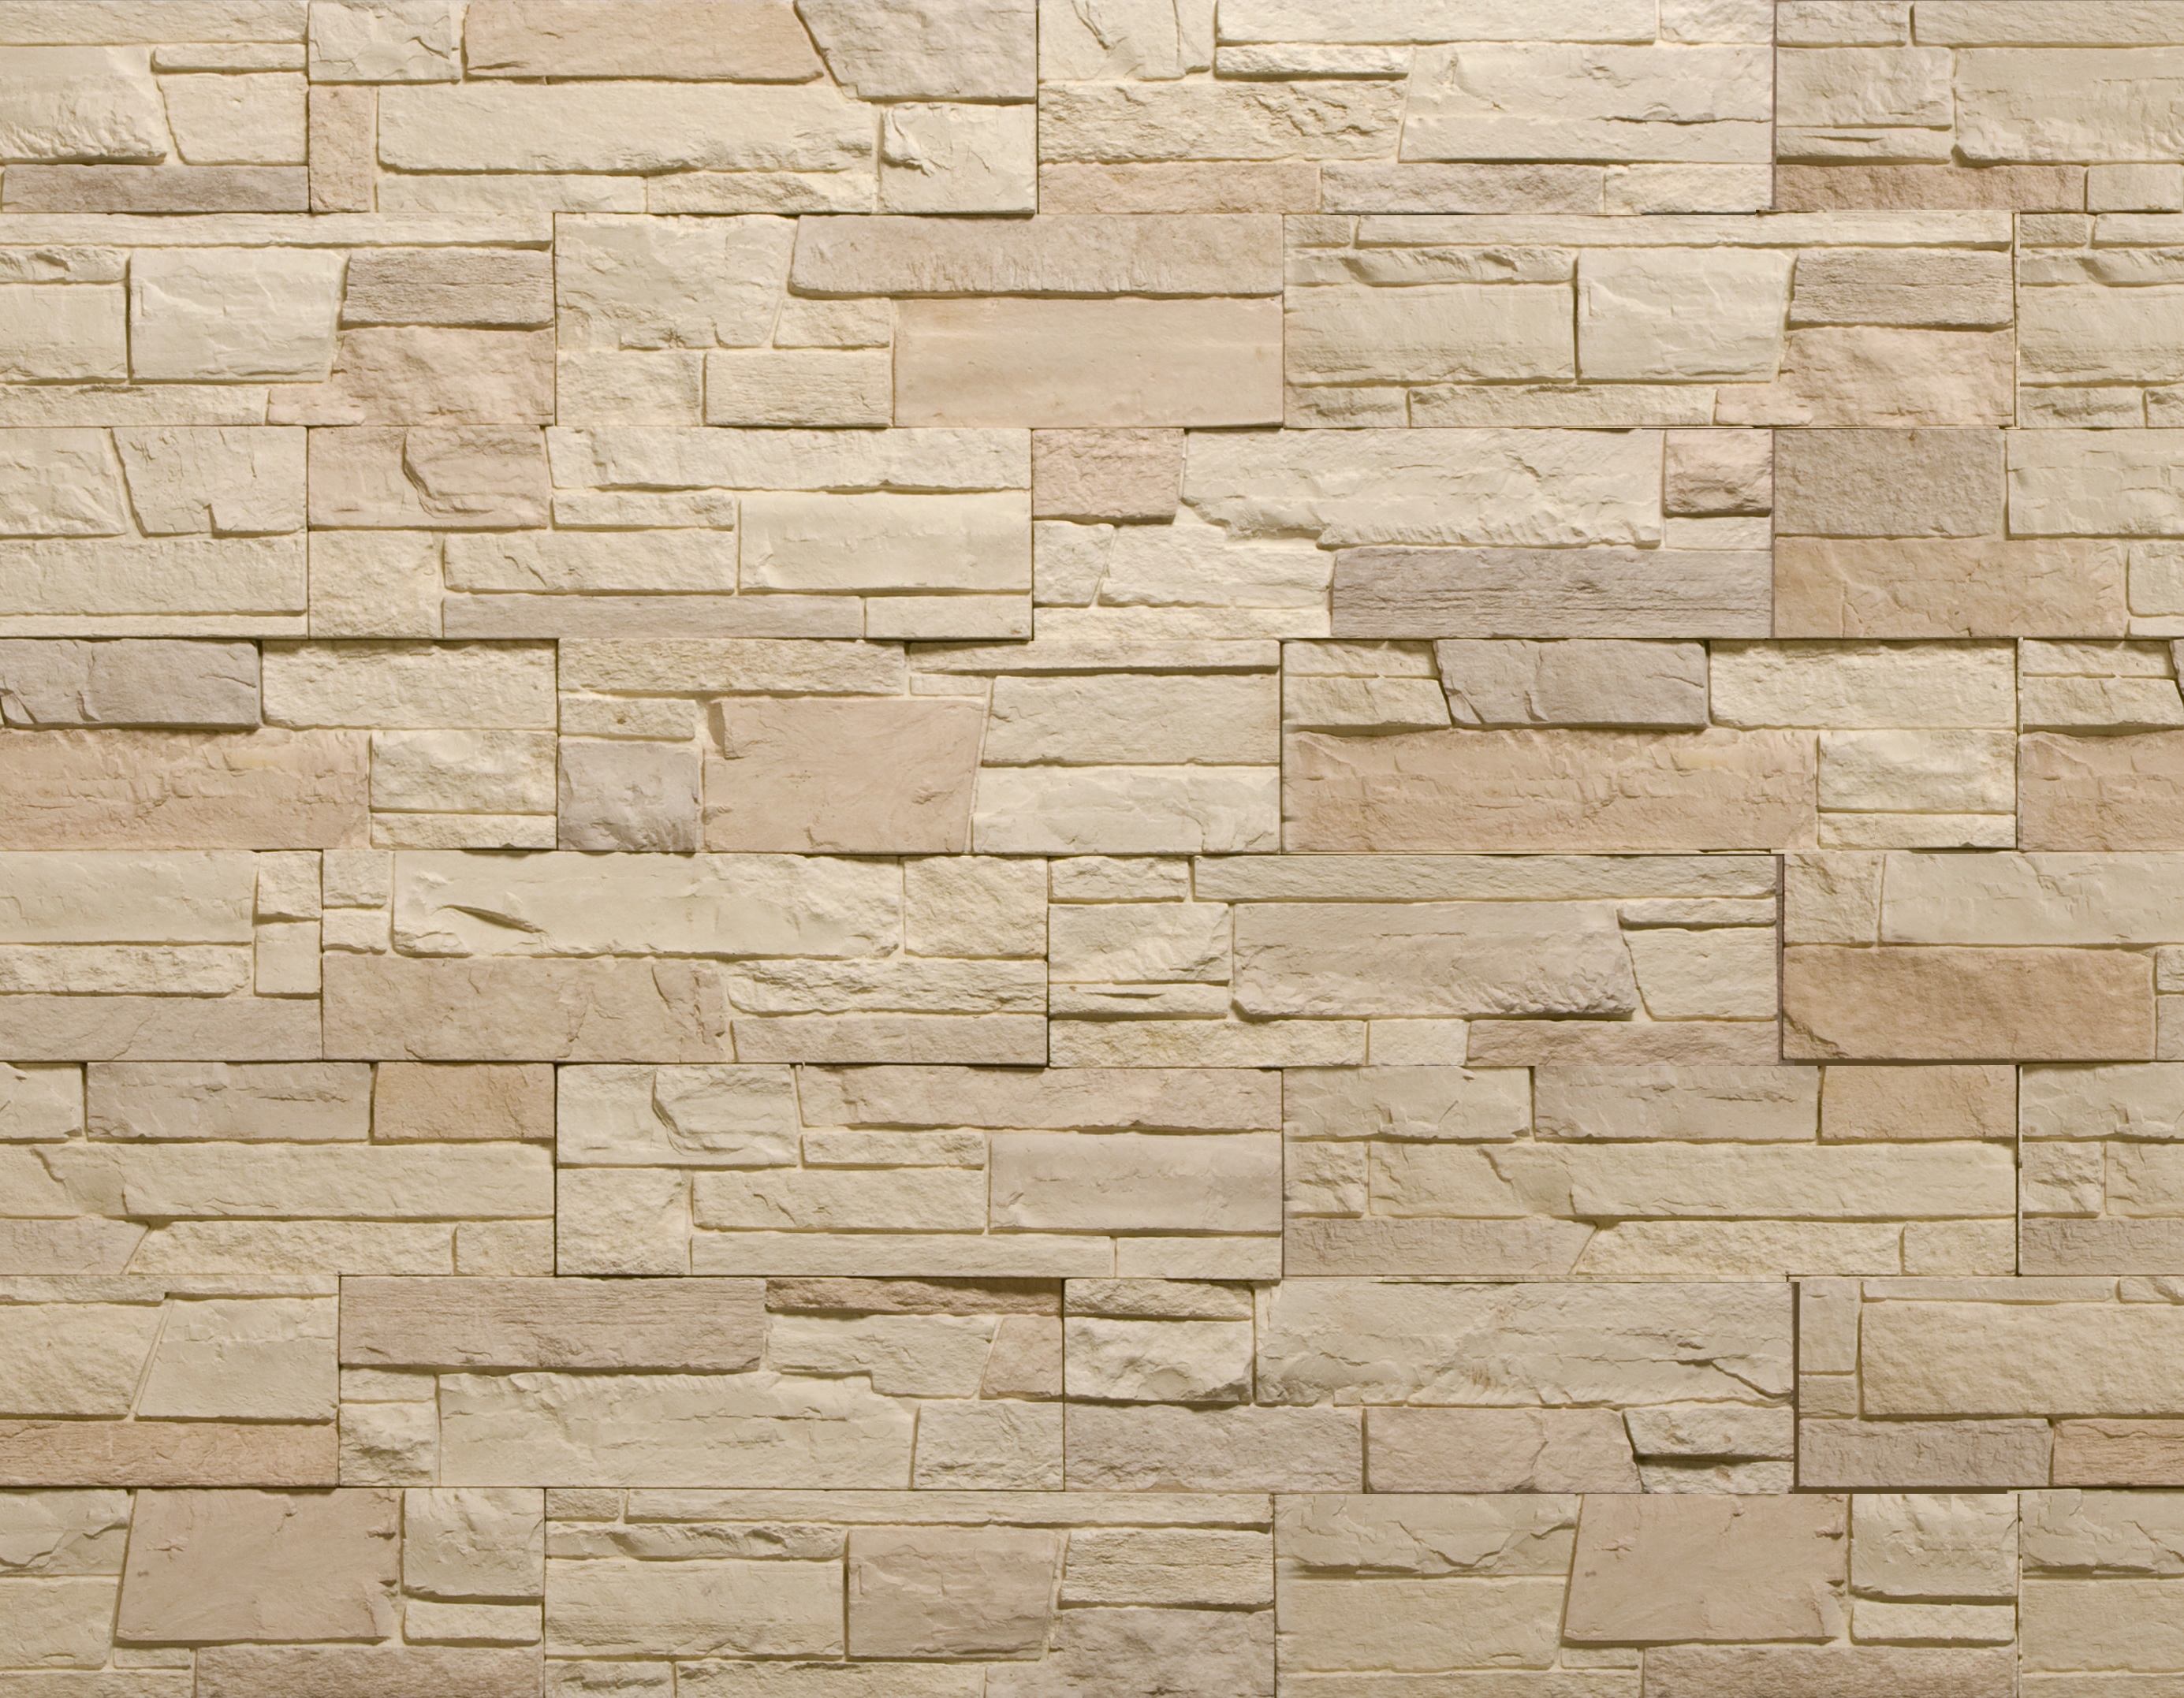 Free photo: Stone Texture Home - Architecture, Construction, Home ...